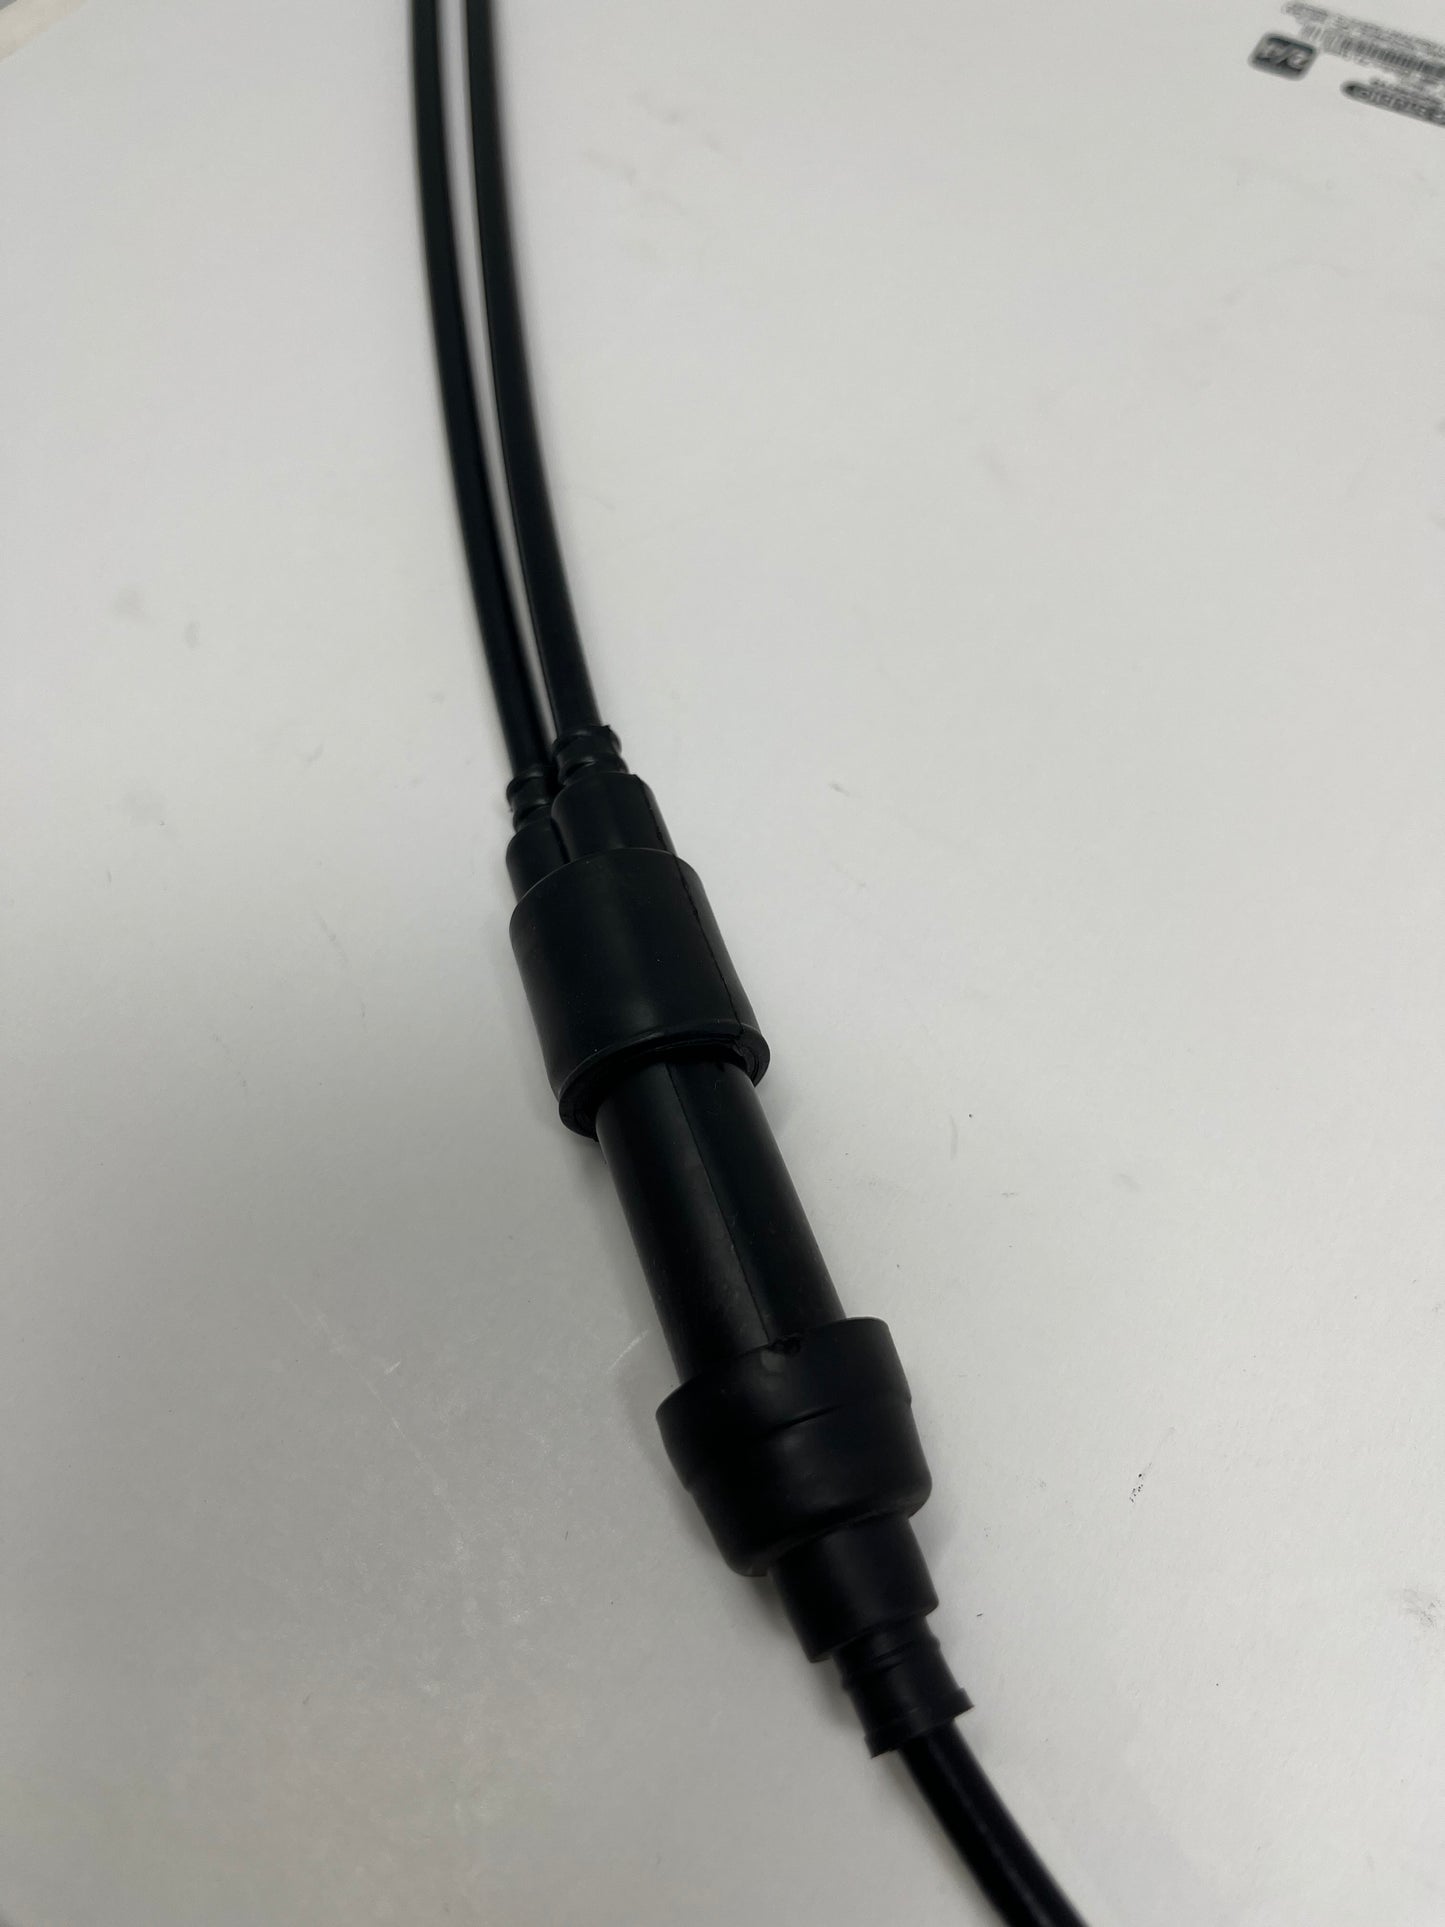 Throttle cable for X22R RTS motorcycle for sale. DF250RTS throttle